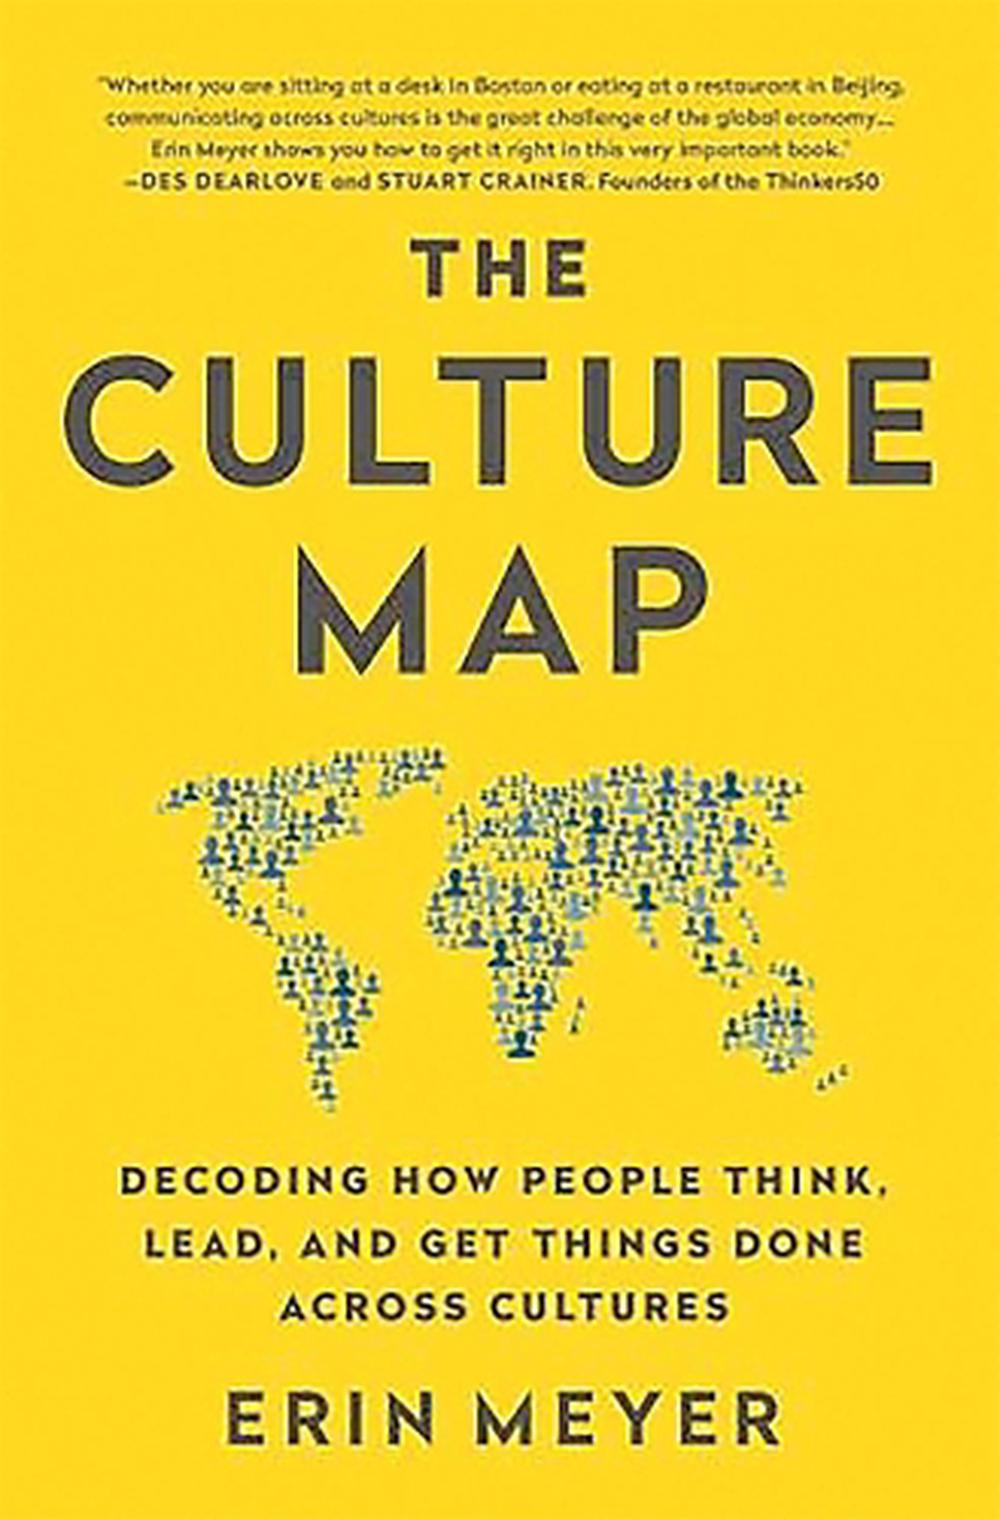 The Culture Map by Erin Meyer - 9781610392761